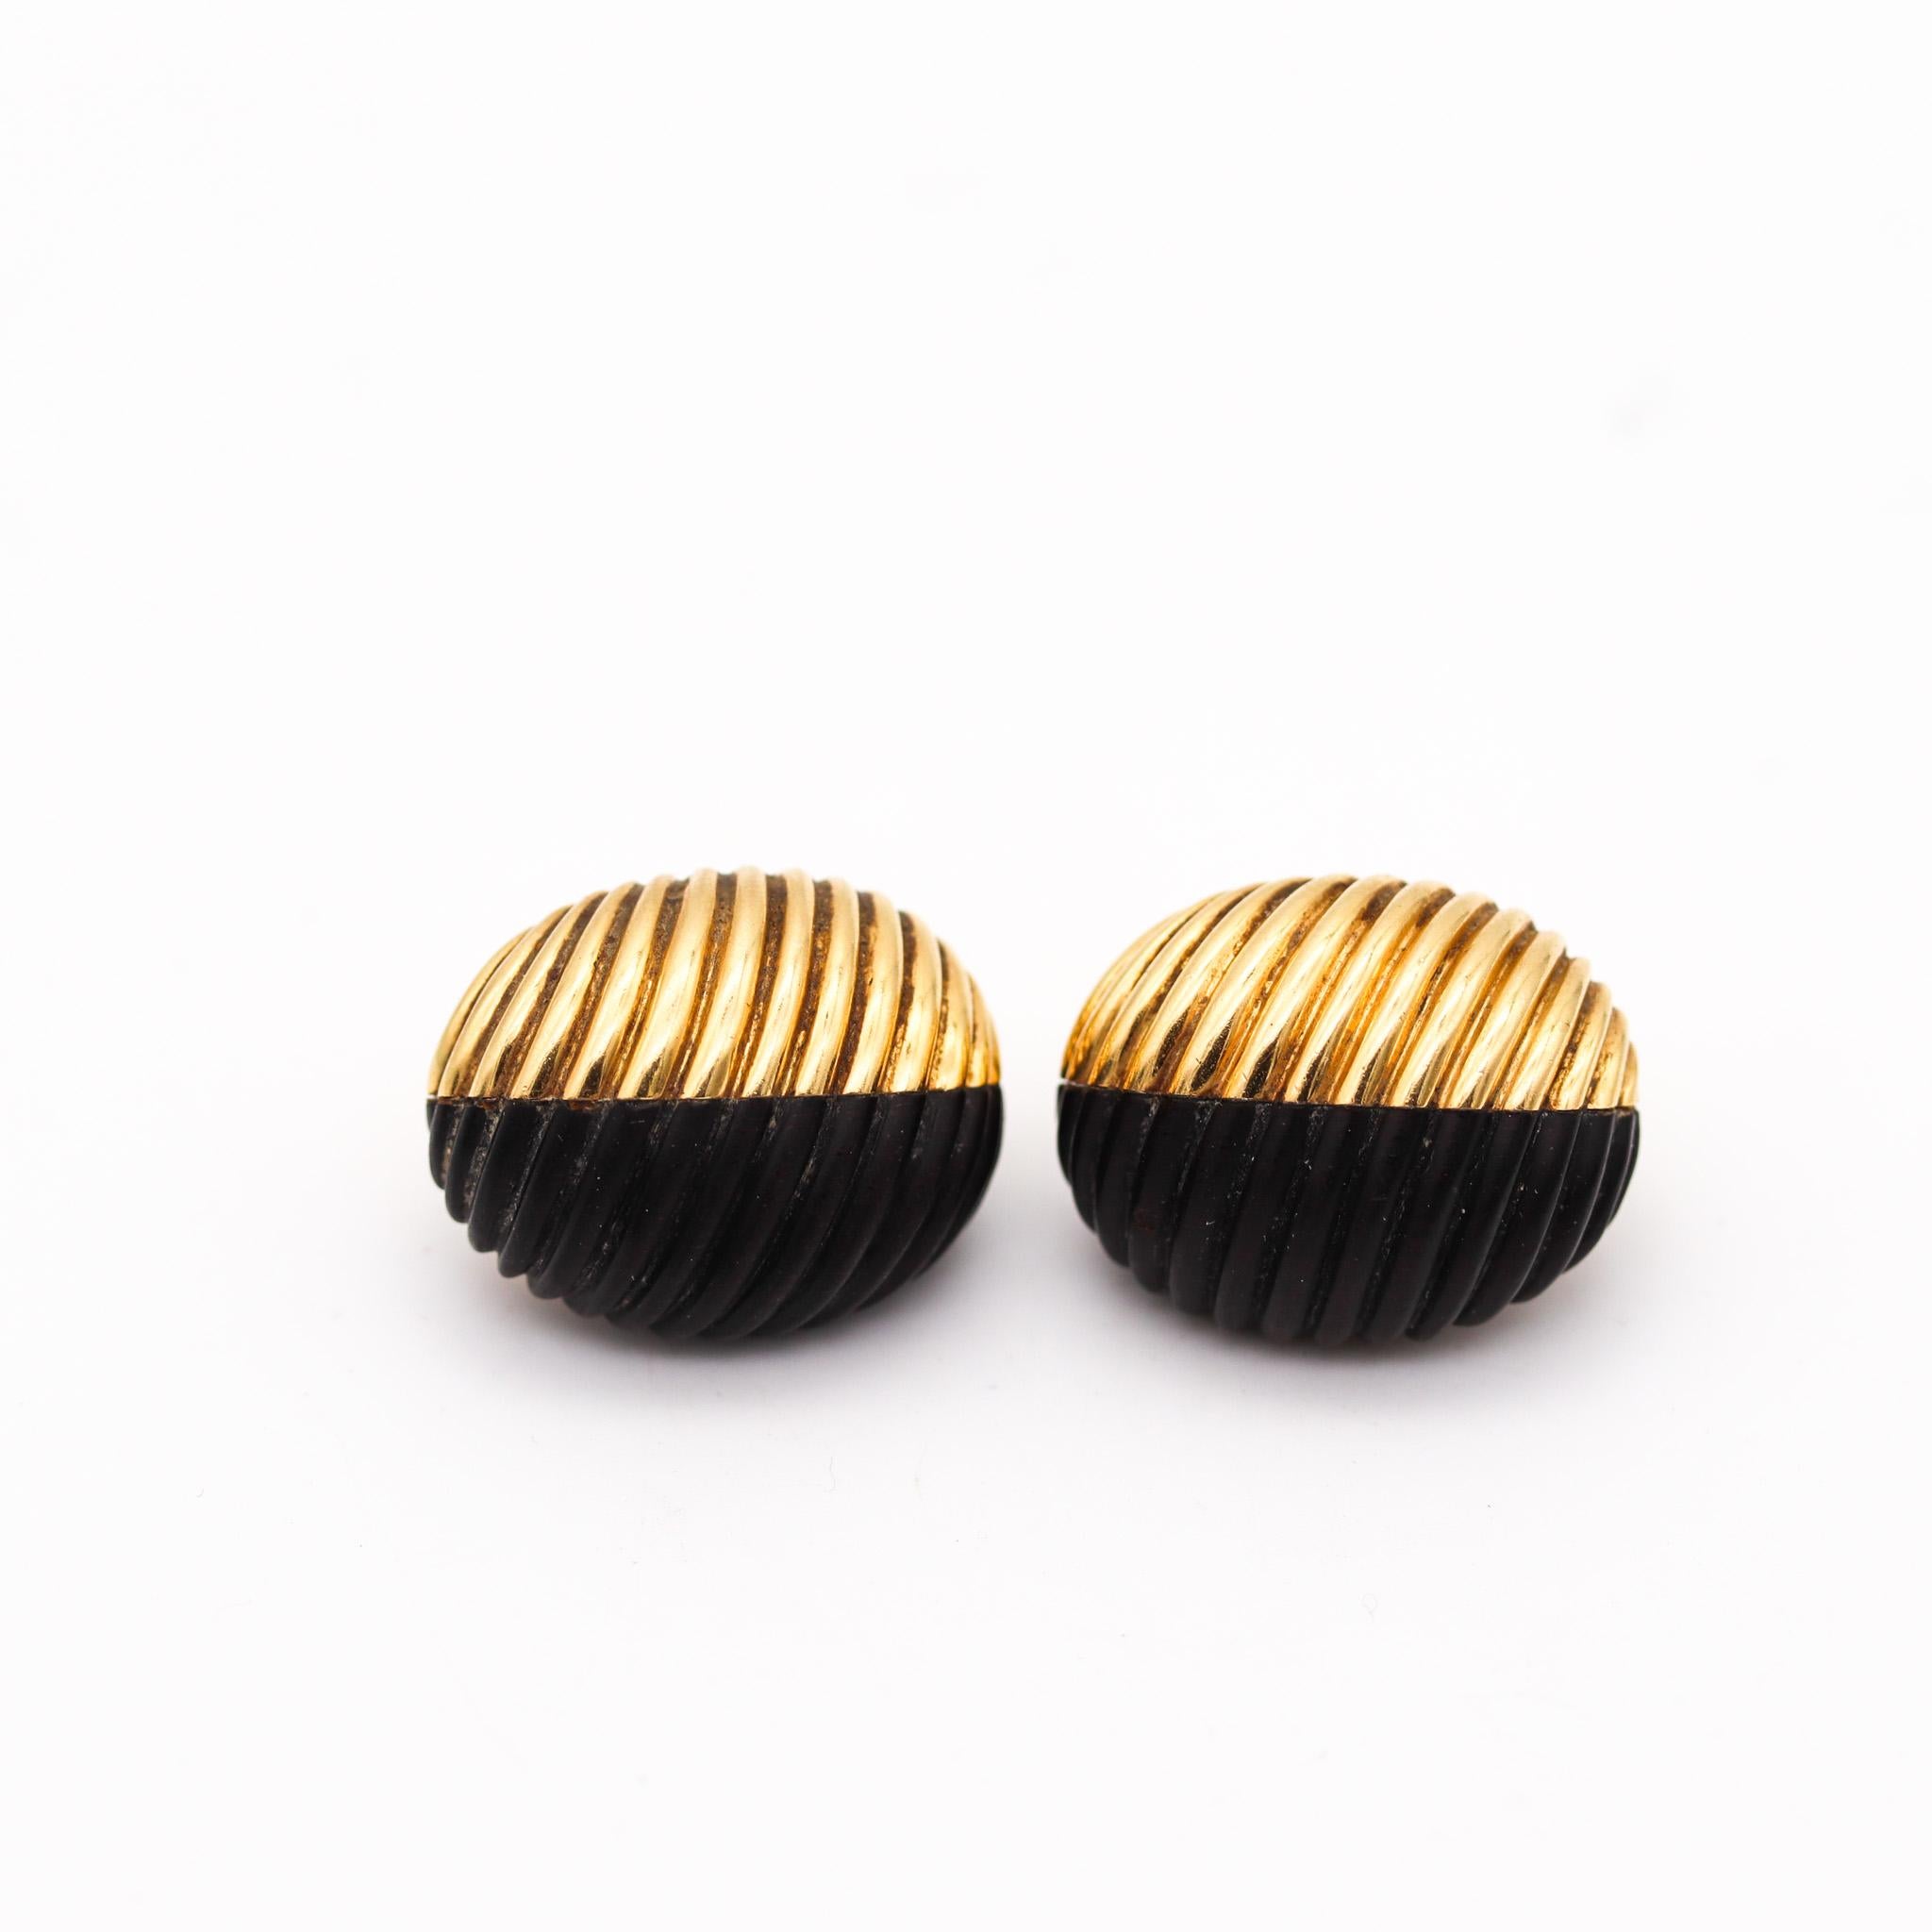 Ear clips designed by Van Cleef & Arpels.

Fabulous and very rare pair of clips-on earrings, created in Paris France by the jewelry house of Van Cleef & Arpels, back in the 1970. These earrings has been crafted with bombe fluted patterns as a left